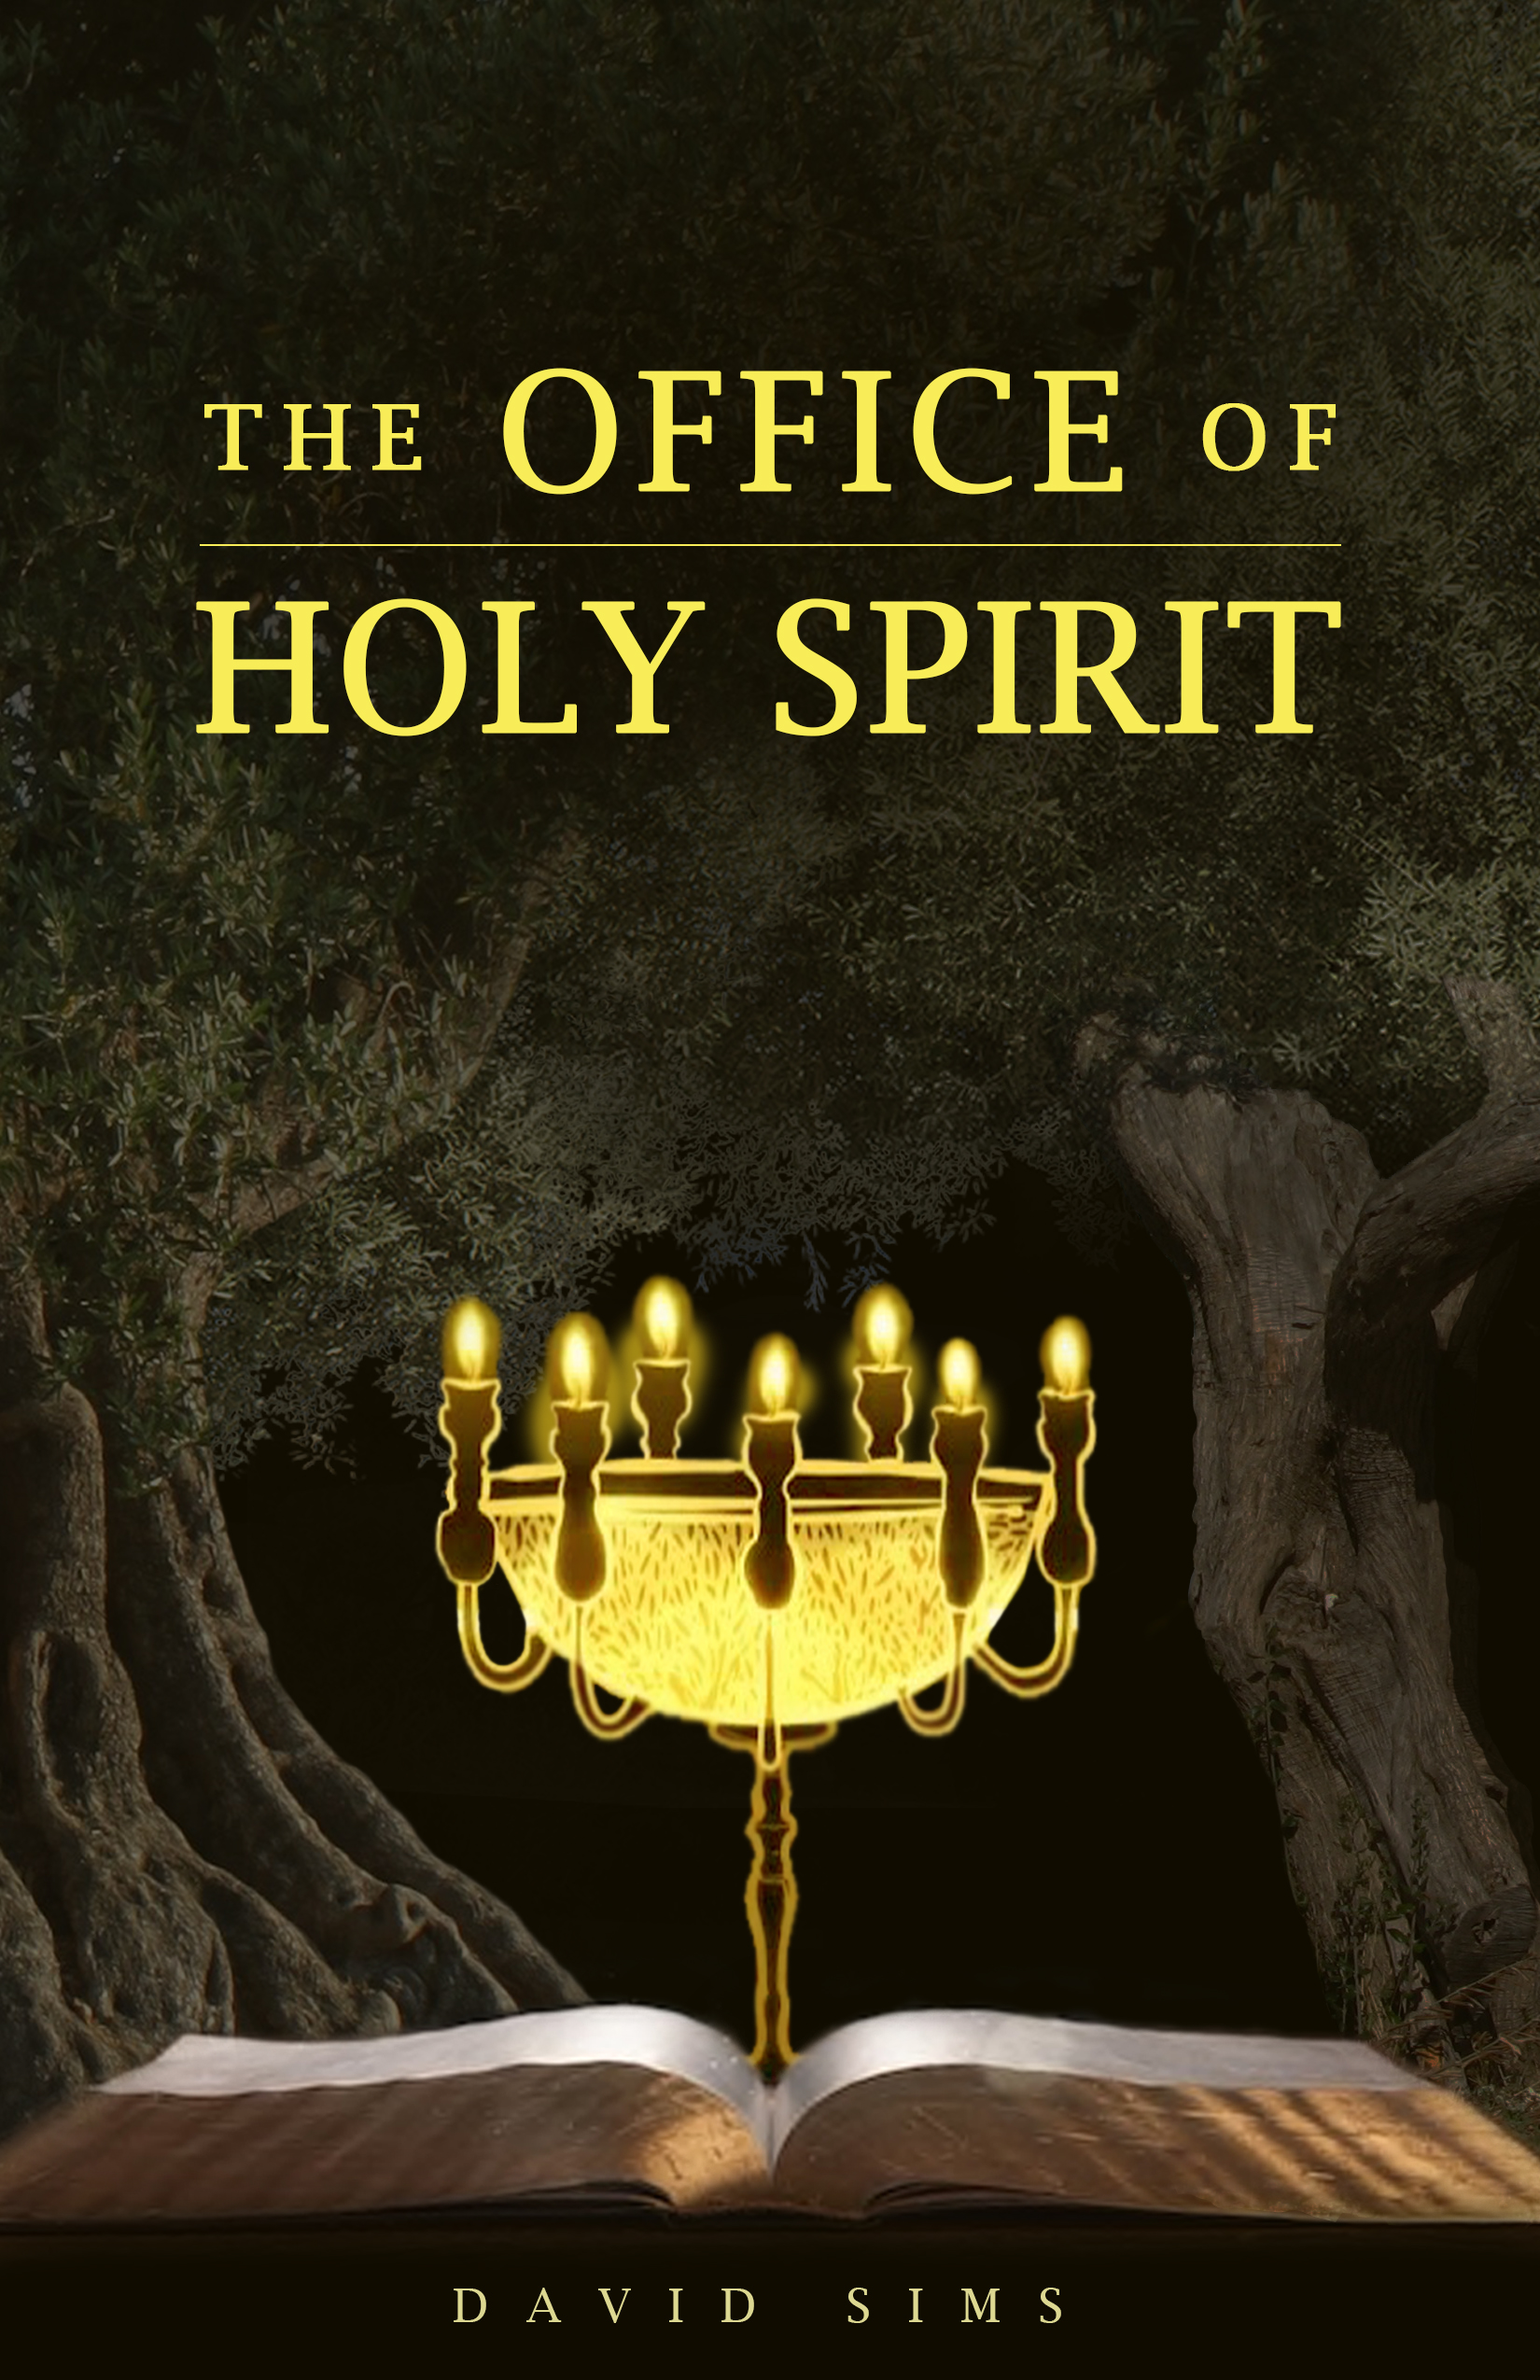 The Office of Holy Spirit